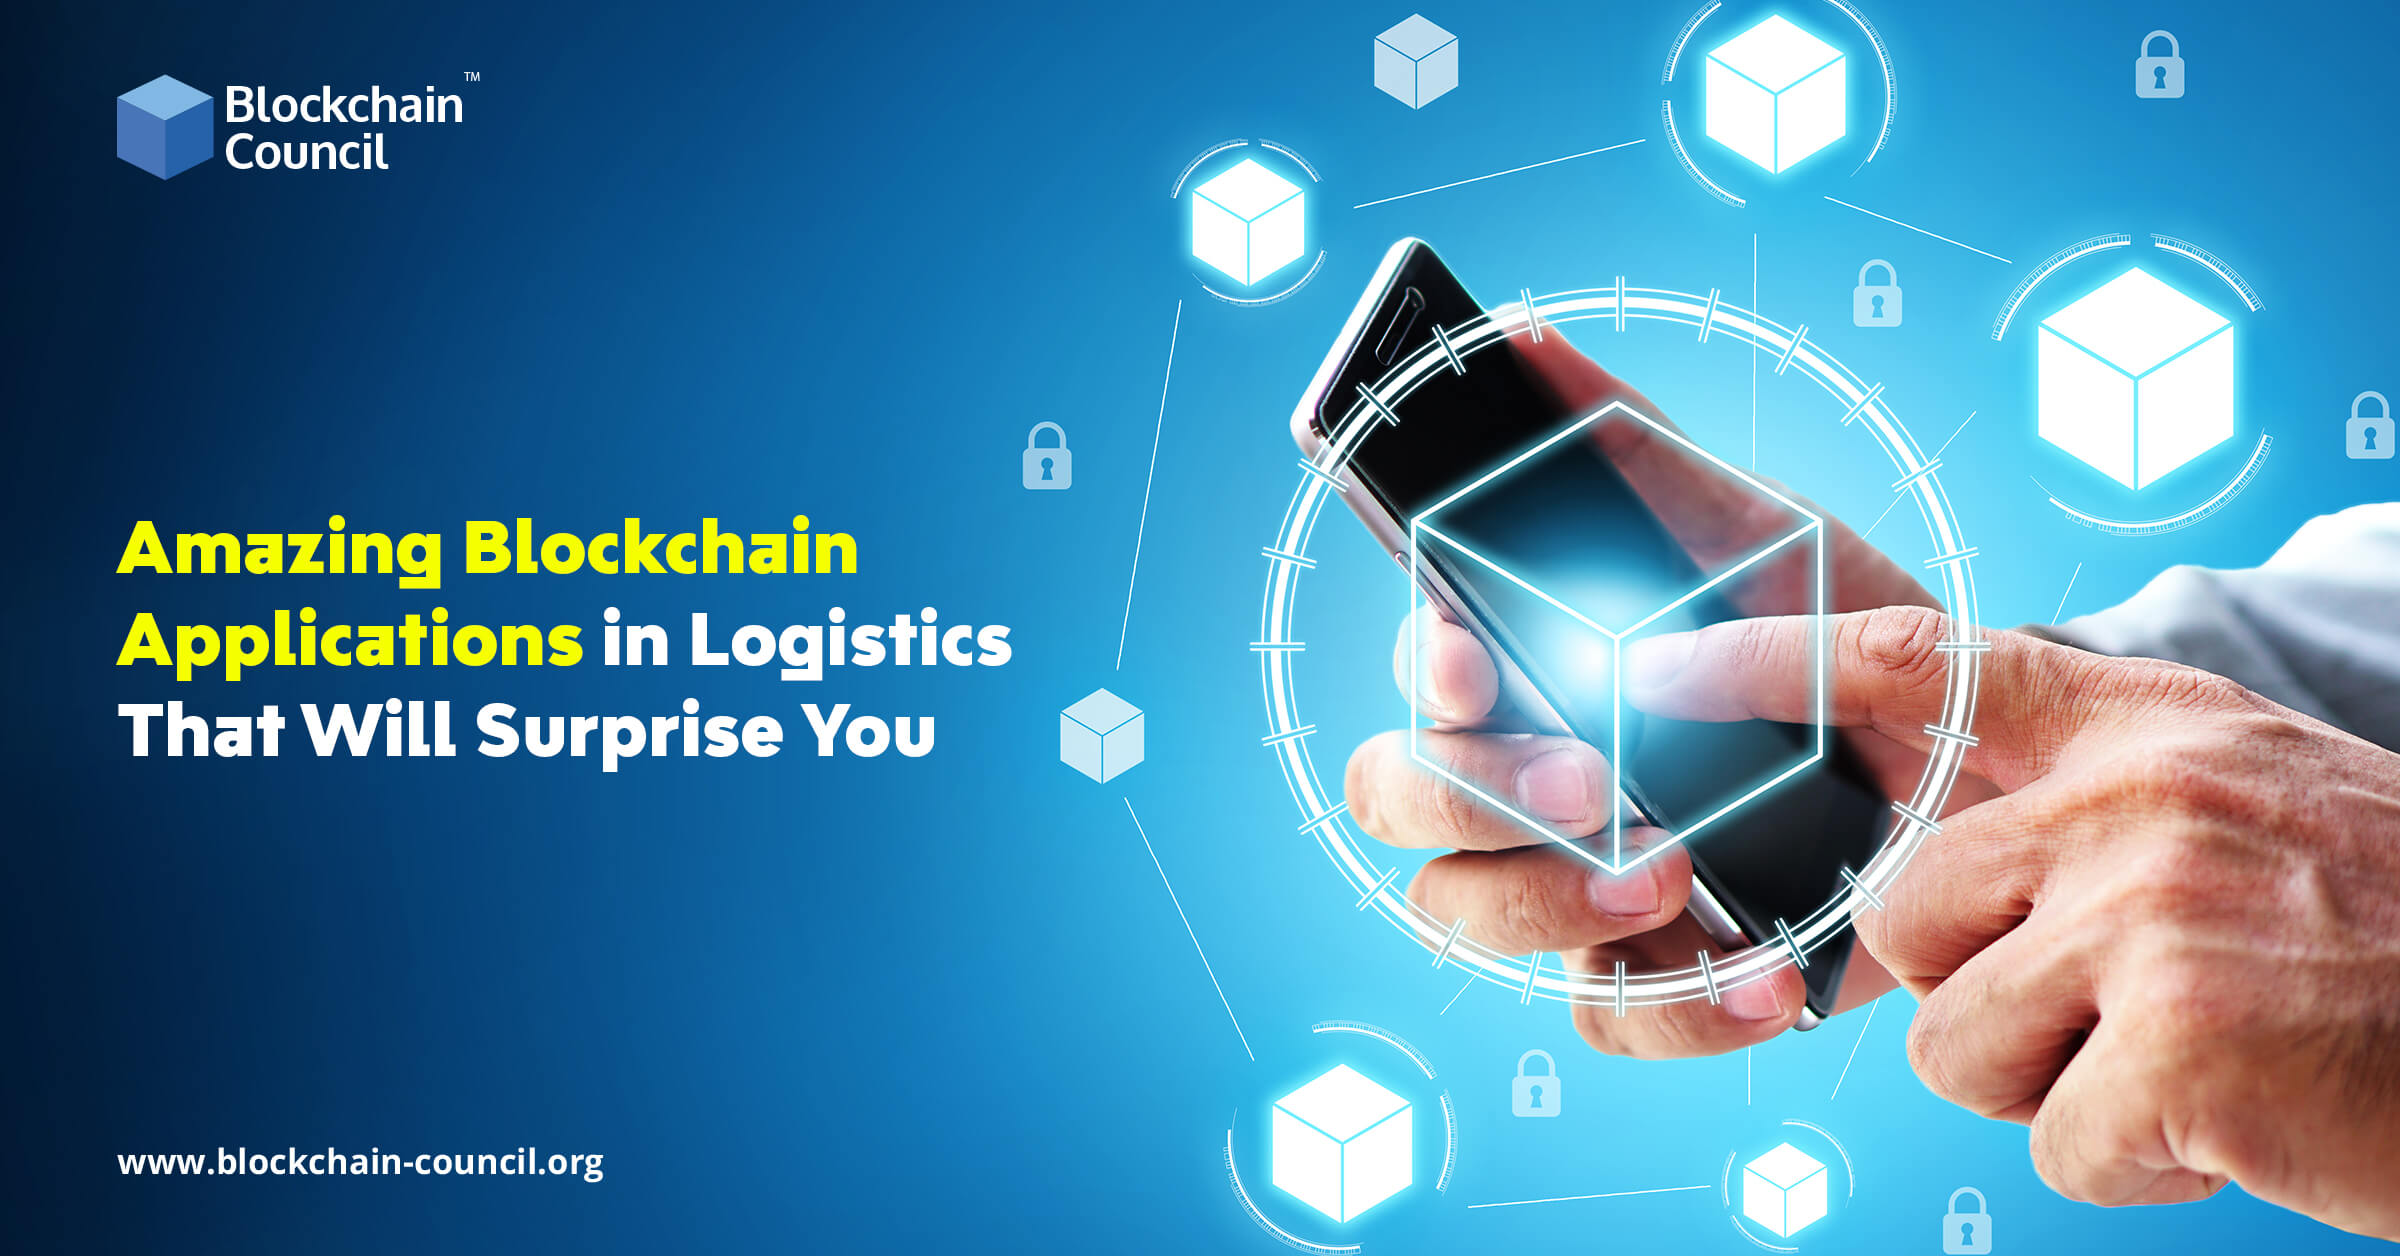 Amazing Blockchain Applications in Logistics That Will Surprise You